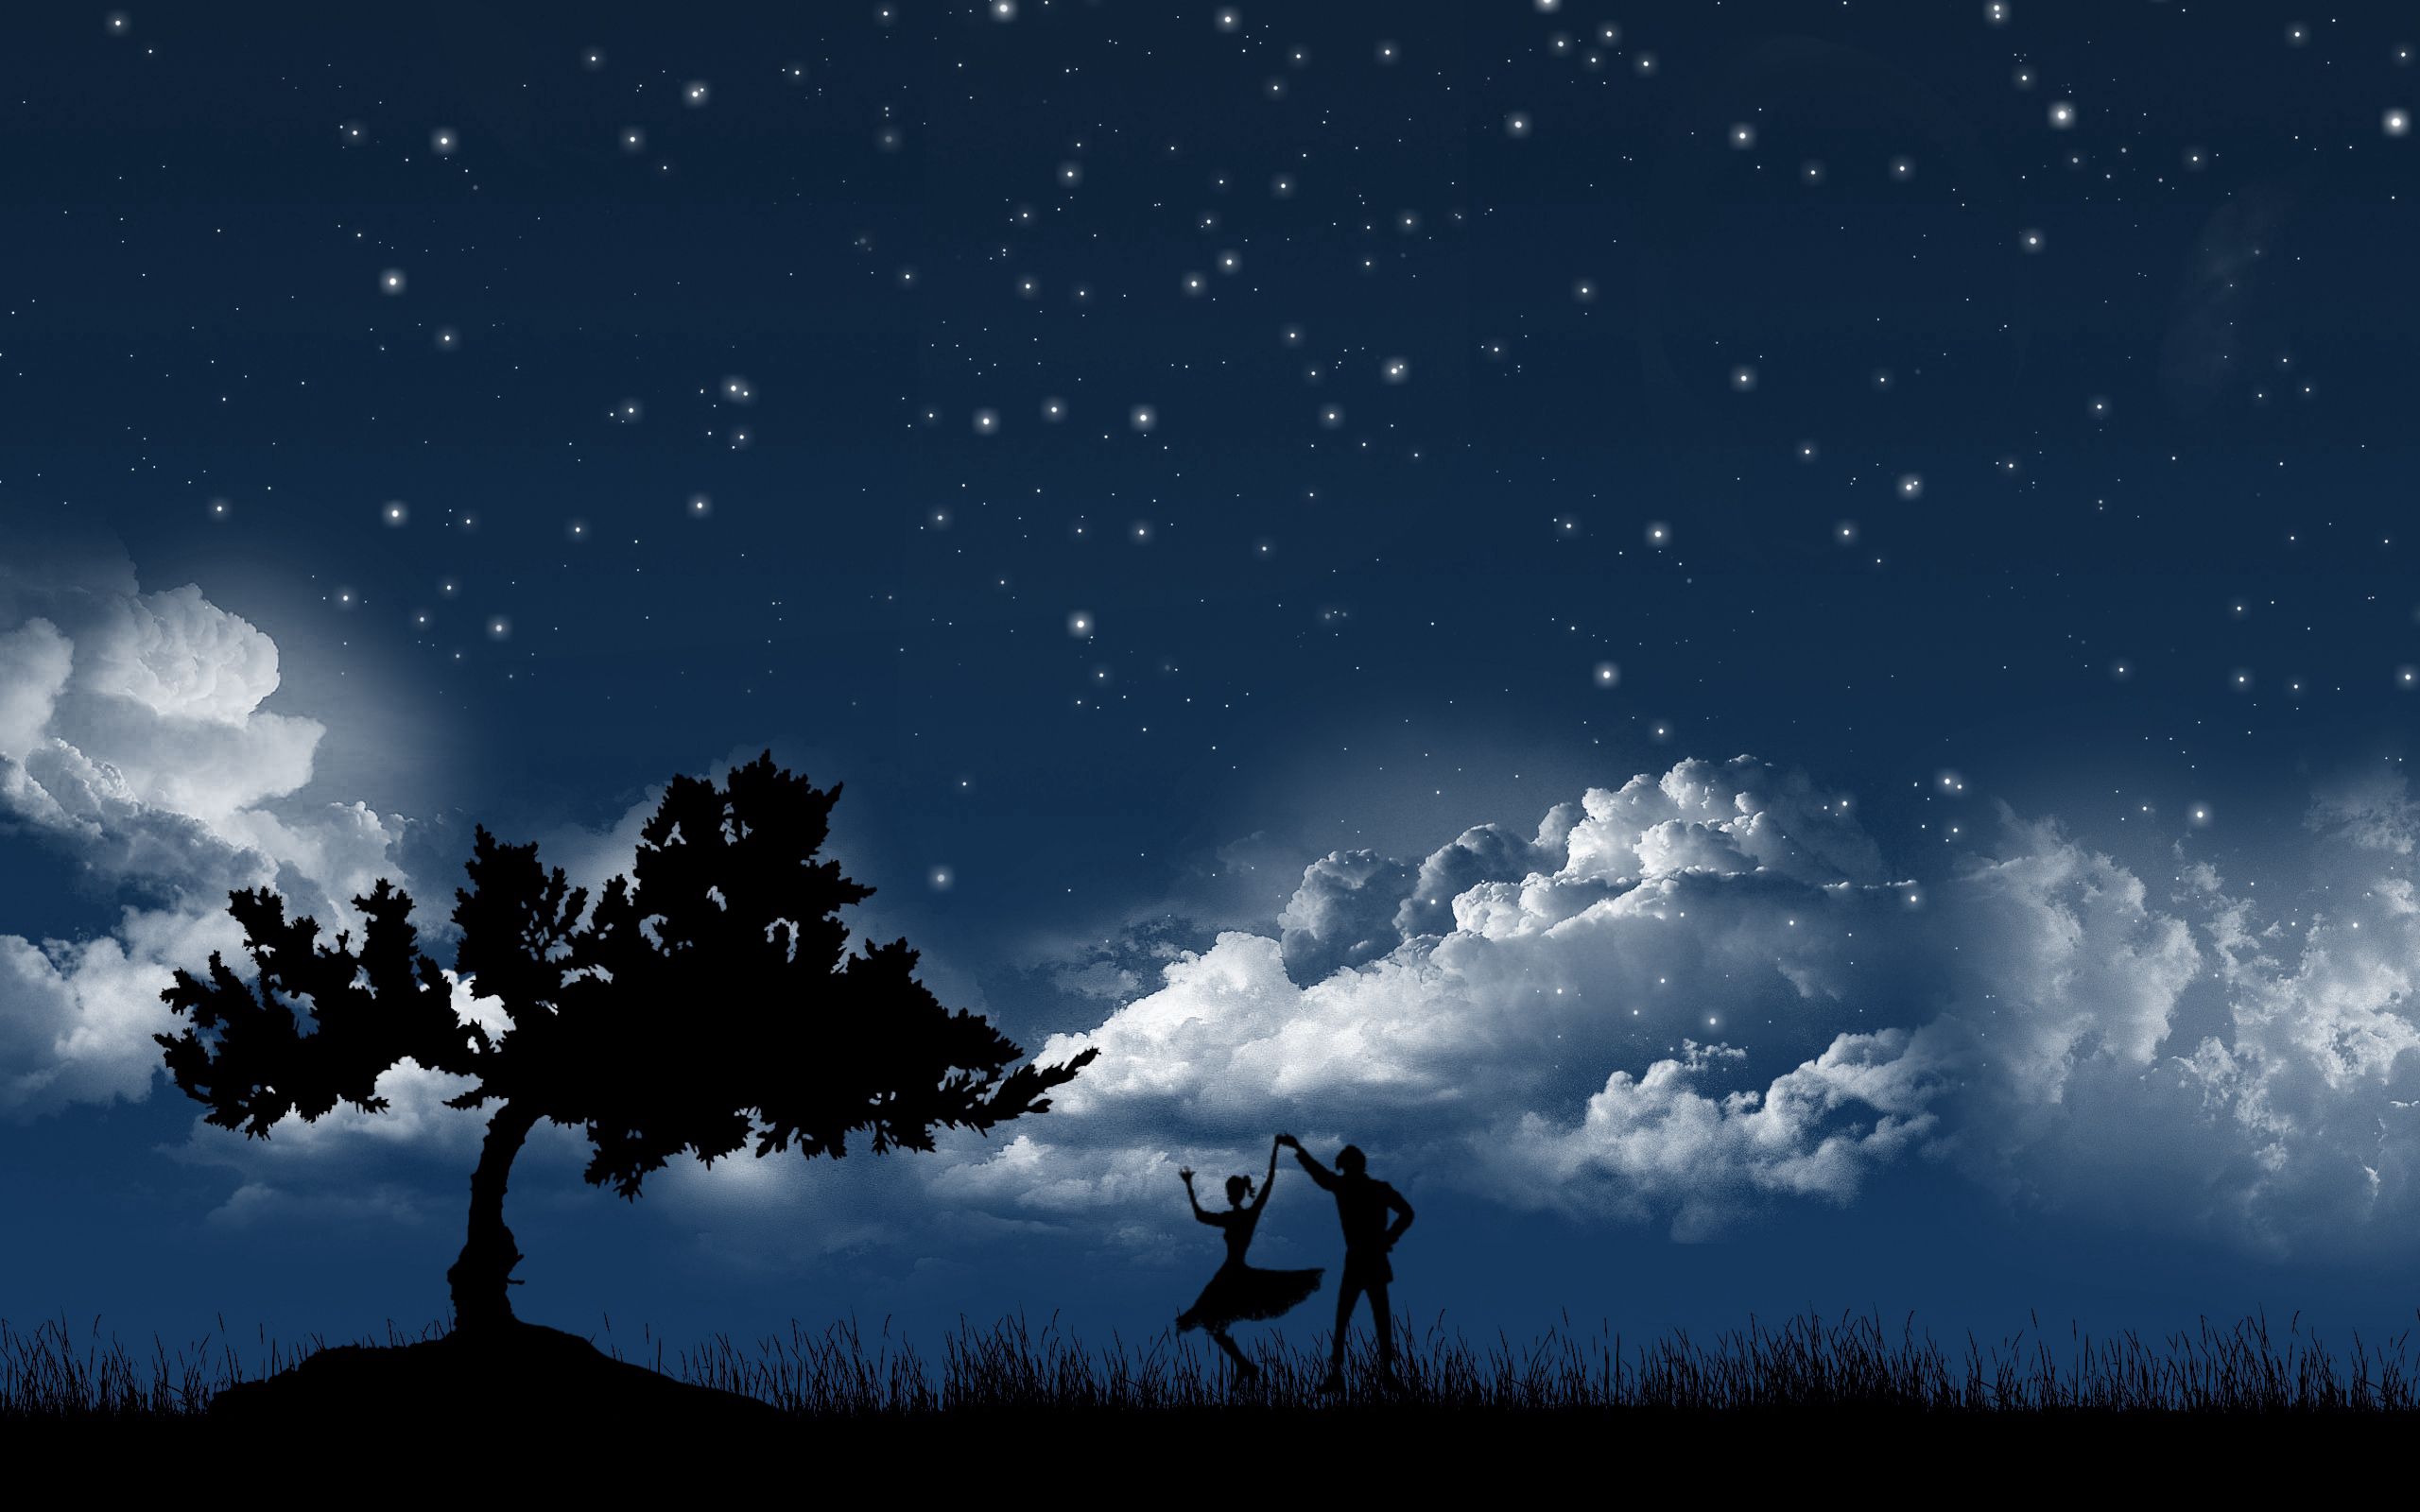 113529 download wallpaper sky, stars, night, clouds, dance, vector, wood, couple, pair, tree, silhouettes screensavers and pictures for free